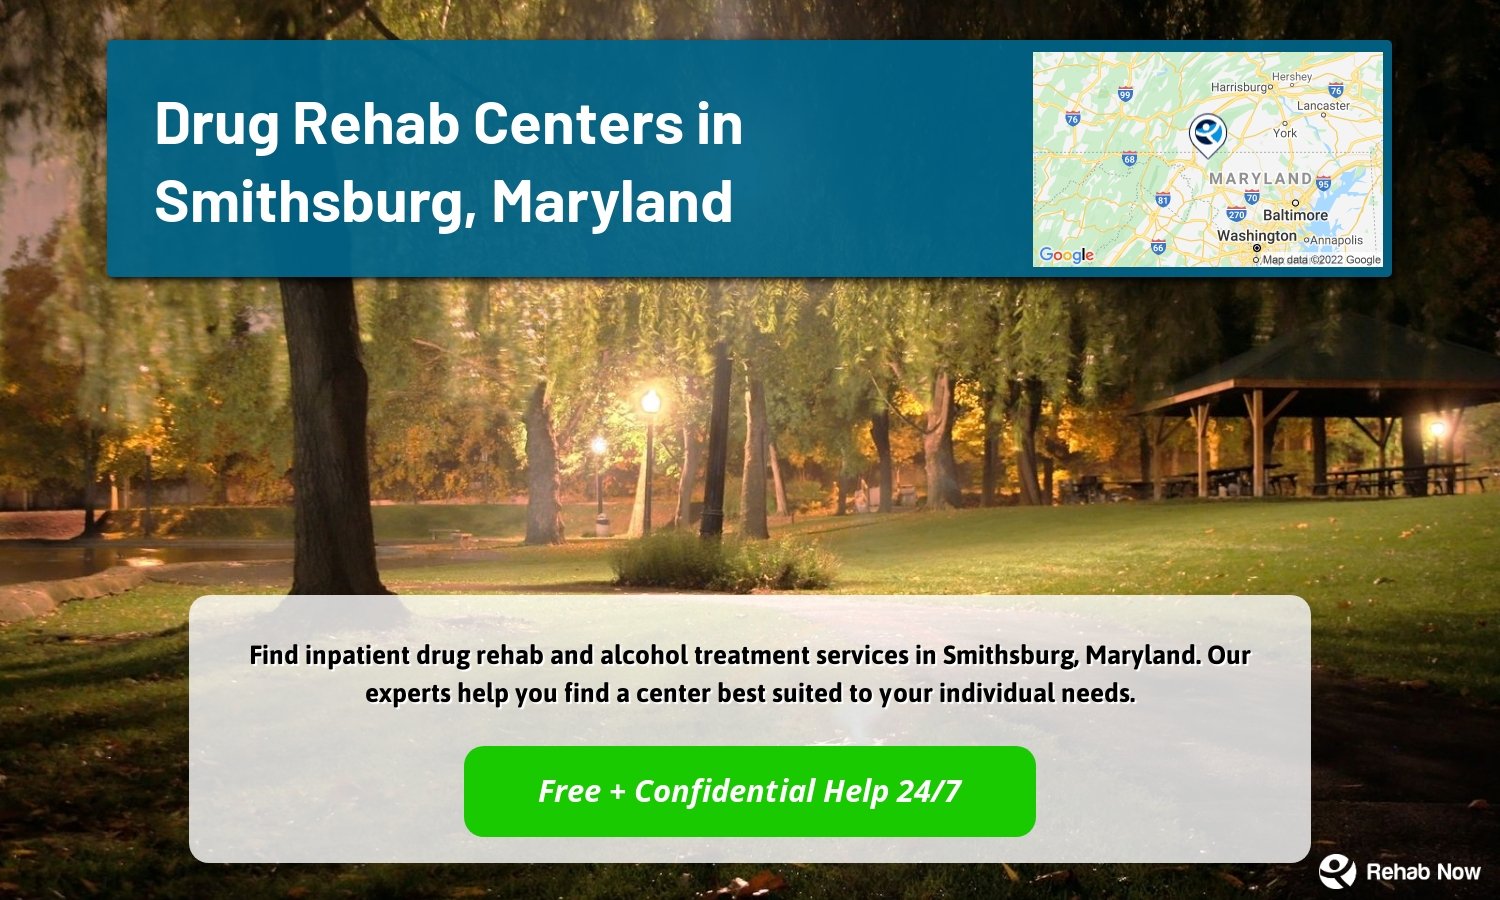 Find inpatient drug rehab and alcohol treatment services in Smithsburg, Maryland. Our experts help you find a center best suited to your individual needs.